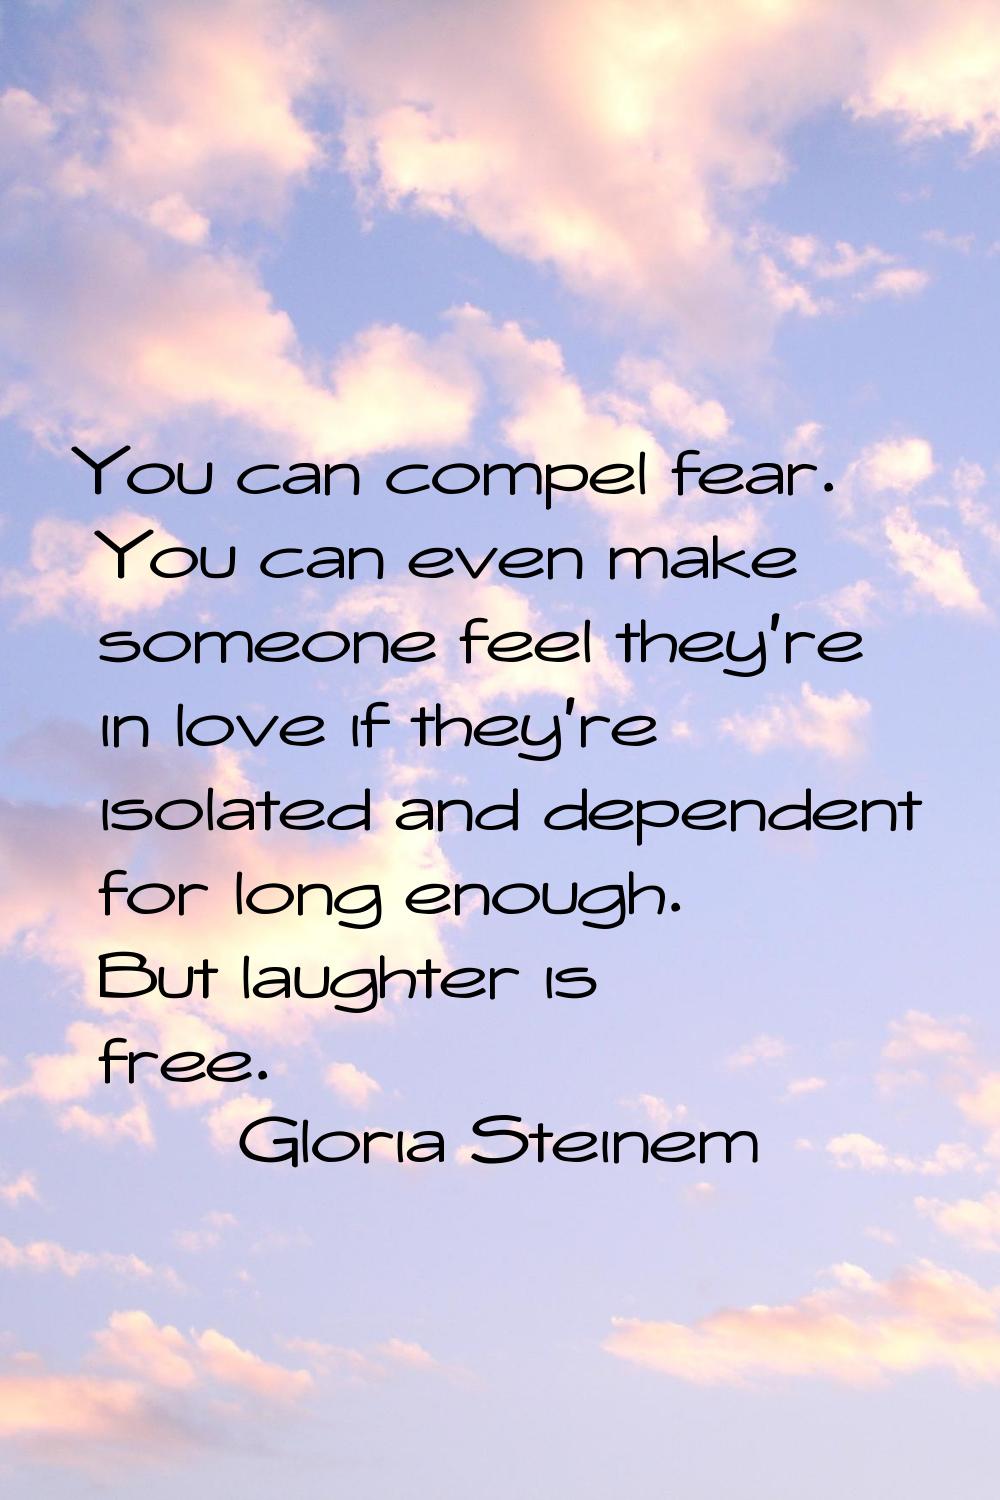 You can compel fear. You can even make someone feel they're in love if they're isolated and depende